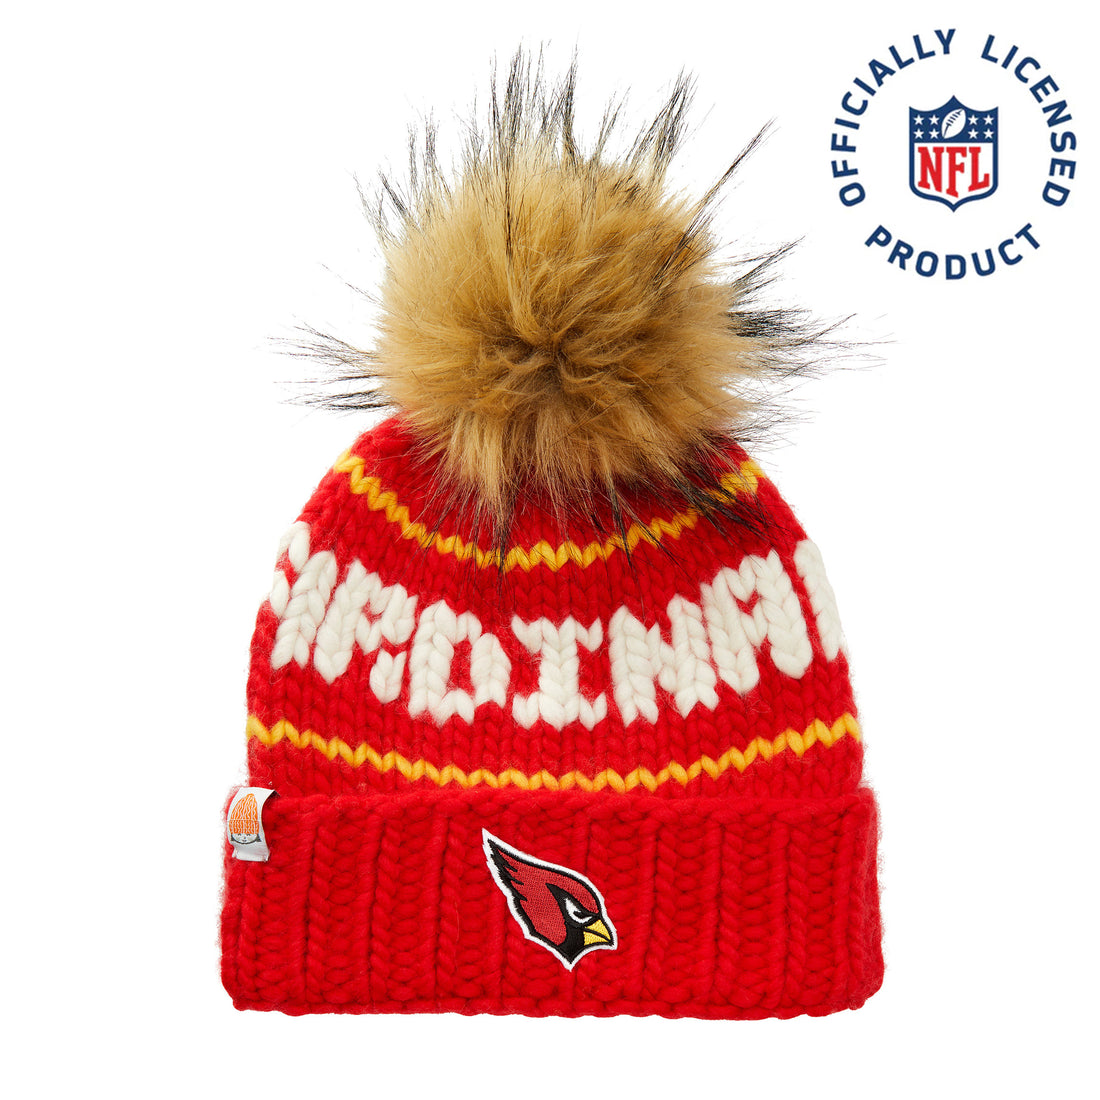 The Cardinals NFL Beanie with Faux Fur Pom